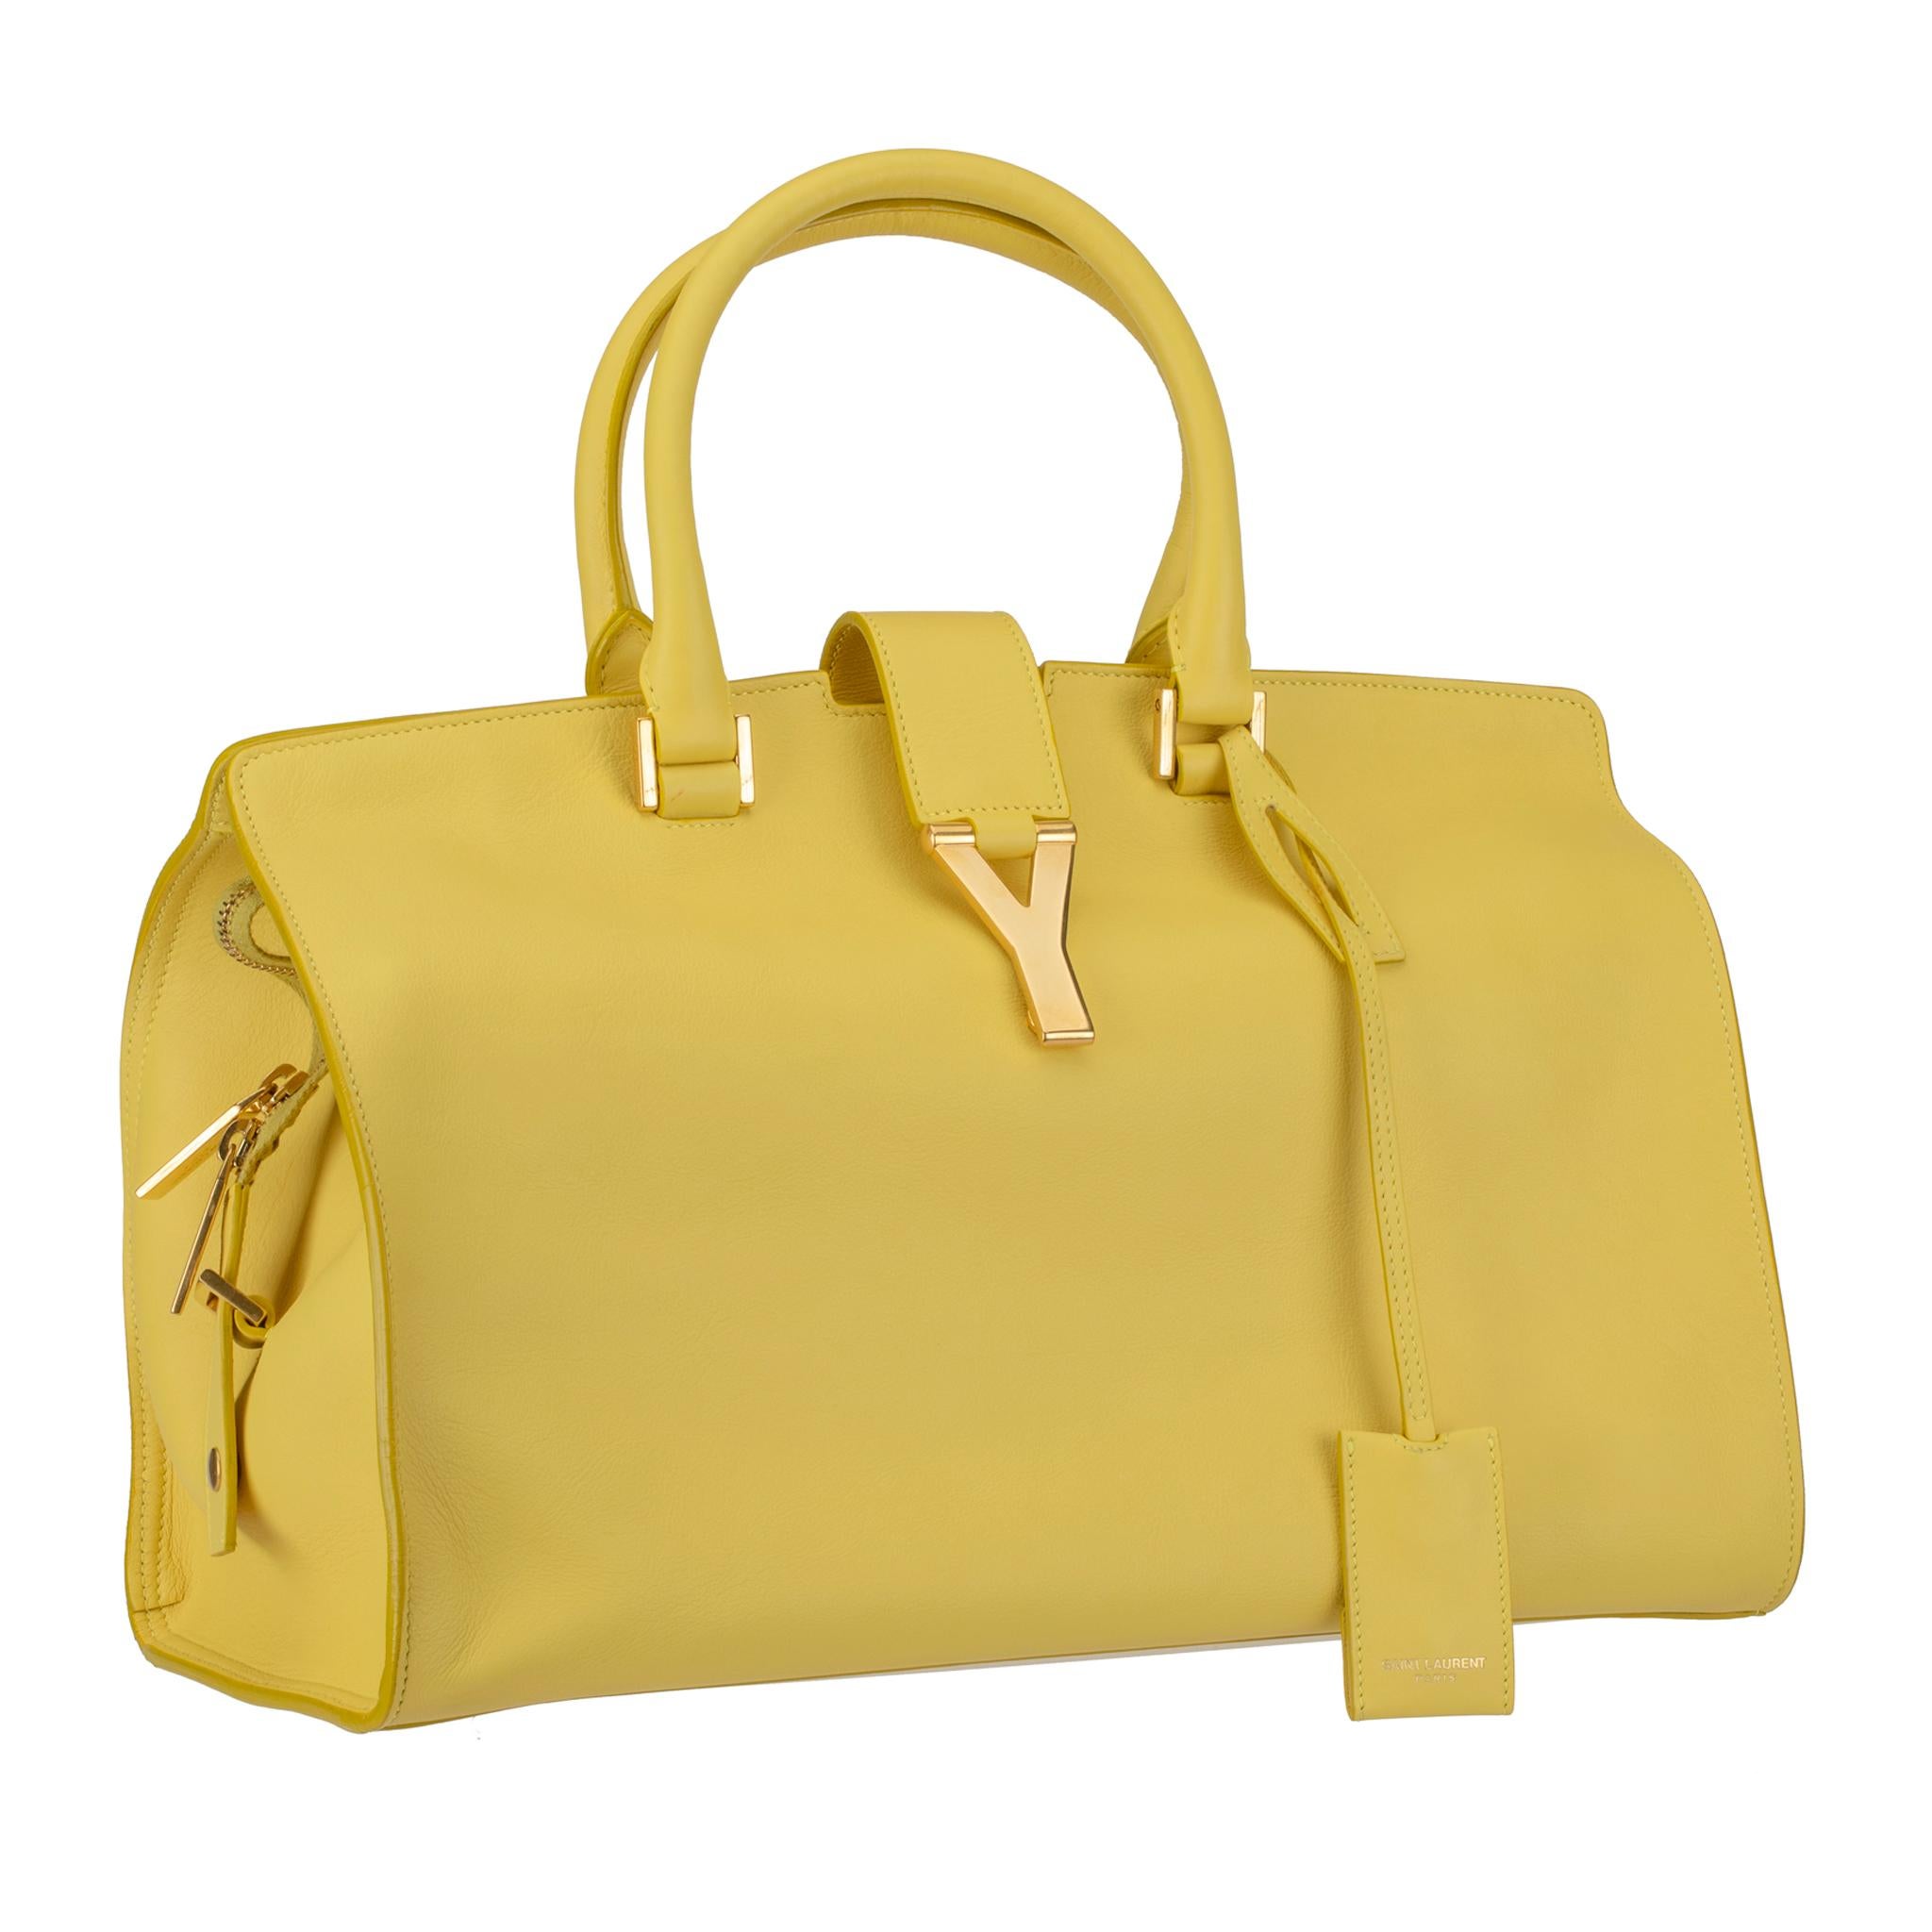 This Saint Laurent Paris yellow Cabas Chyc tote bag is perfect for everyday usage. The bag is made of leather and features a gold-tone Y motif snap clasp, twin wrapped handles, and metal feet at the bottom.
A roomy suede lined inside with a zip